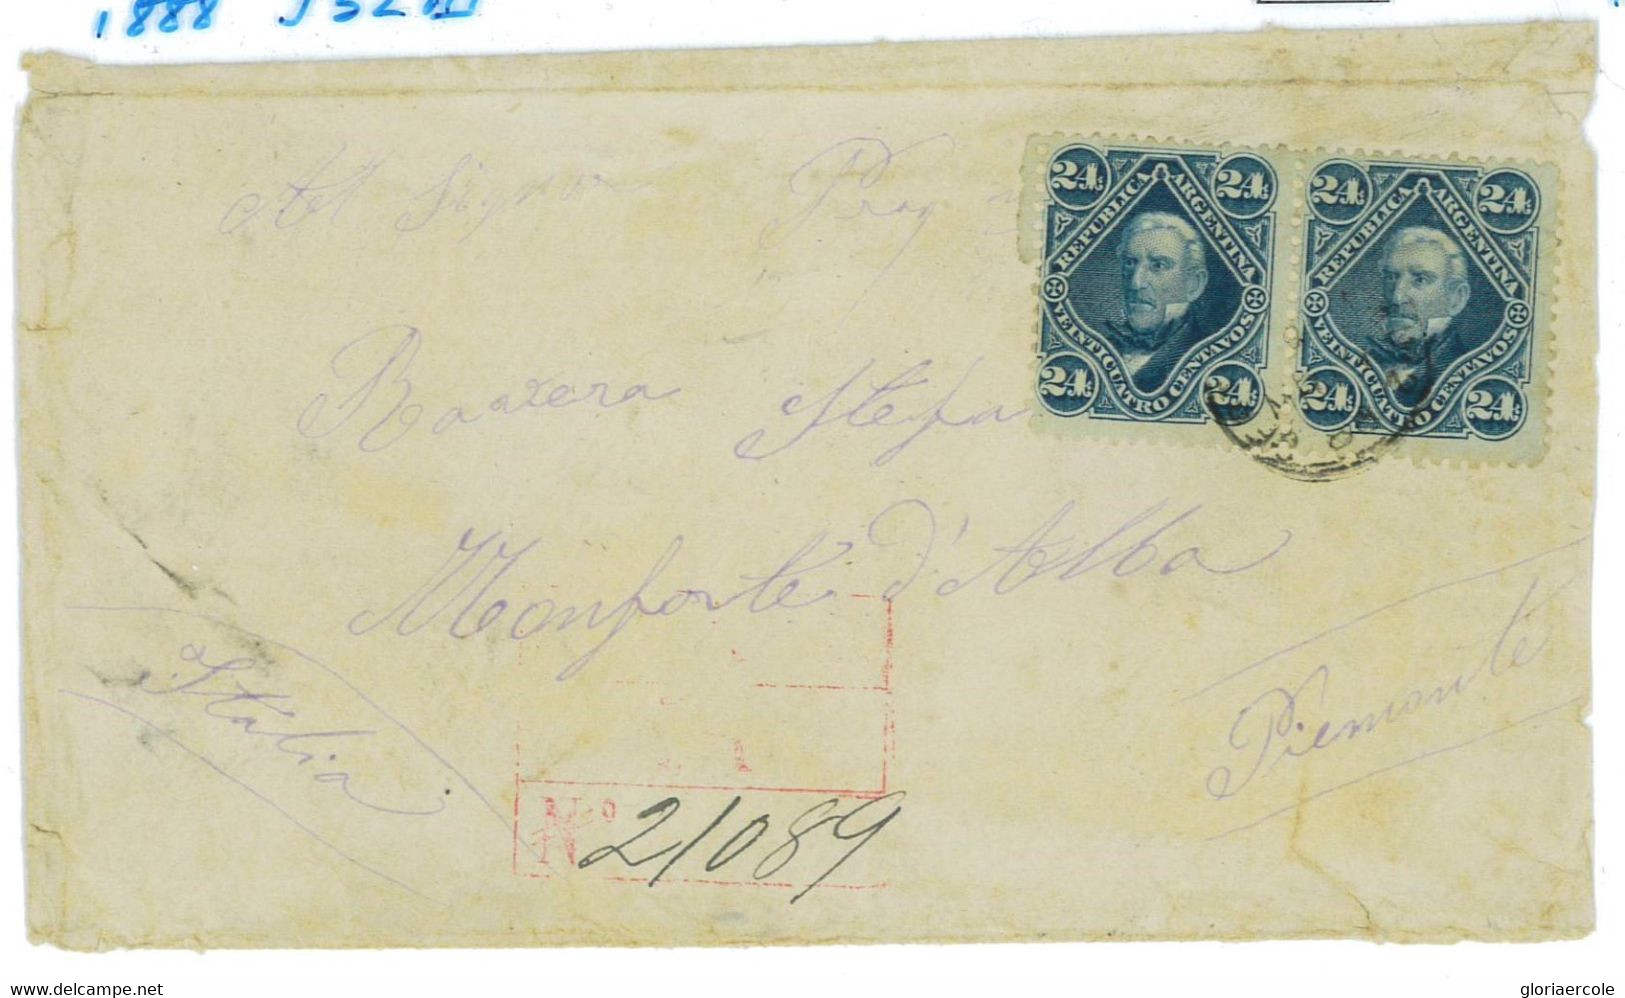 P0253 - ARGENTINA - POSTAL HISTORY - Jalil # 52 Pair - REGISTERED COVER  To ITALY  1888 - Cartas & Documentos